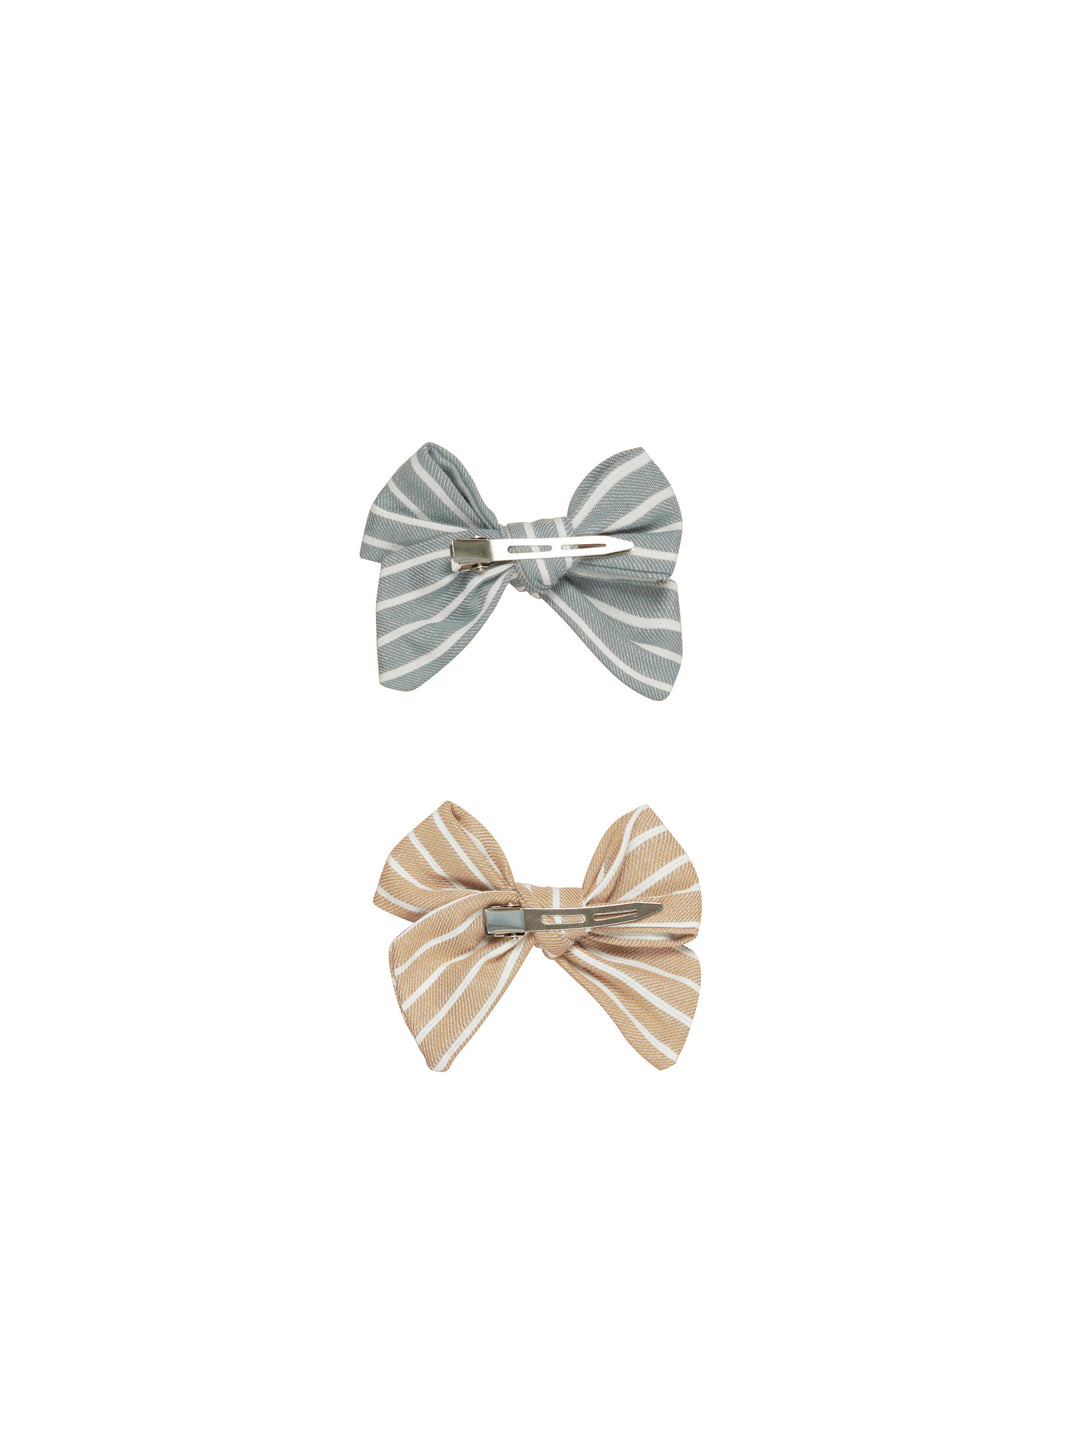 Huxbaby Stripe 2Pk Hair Bow - Teal + Biscuit